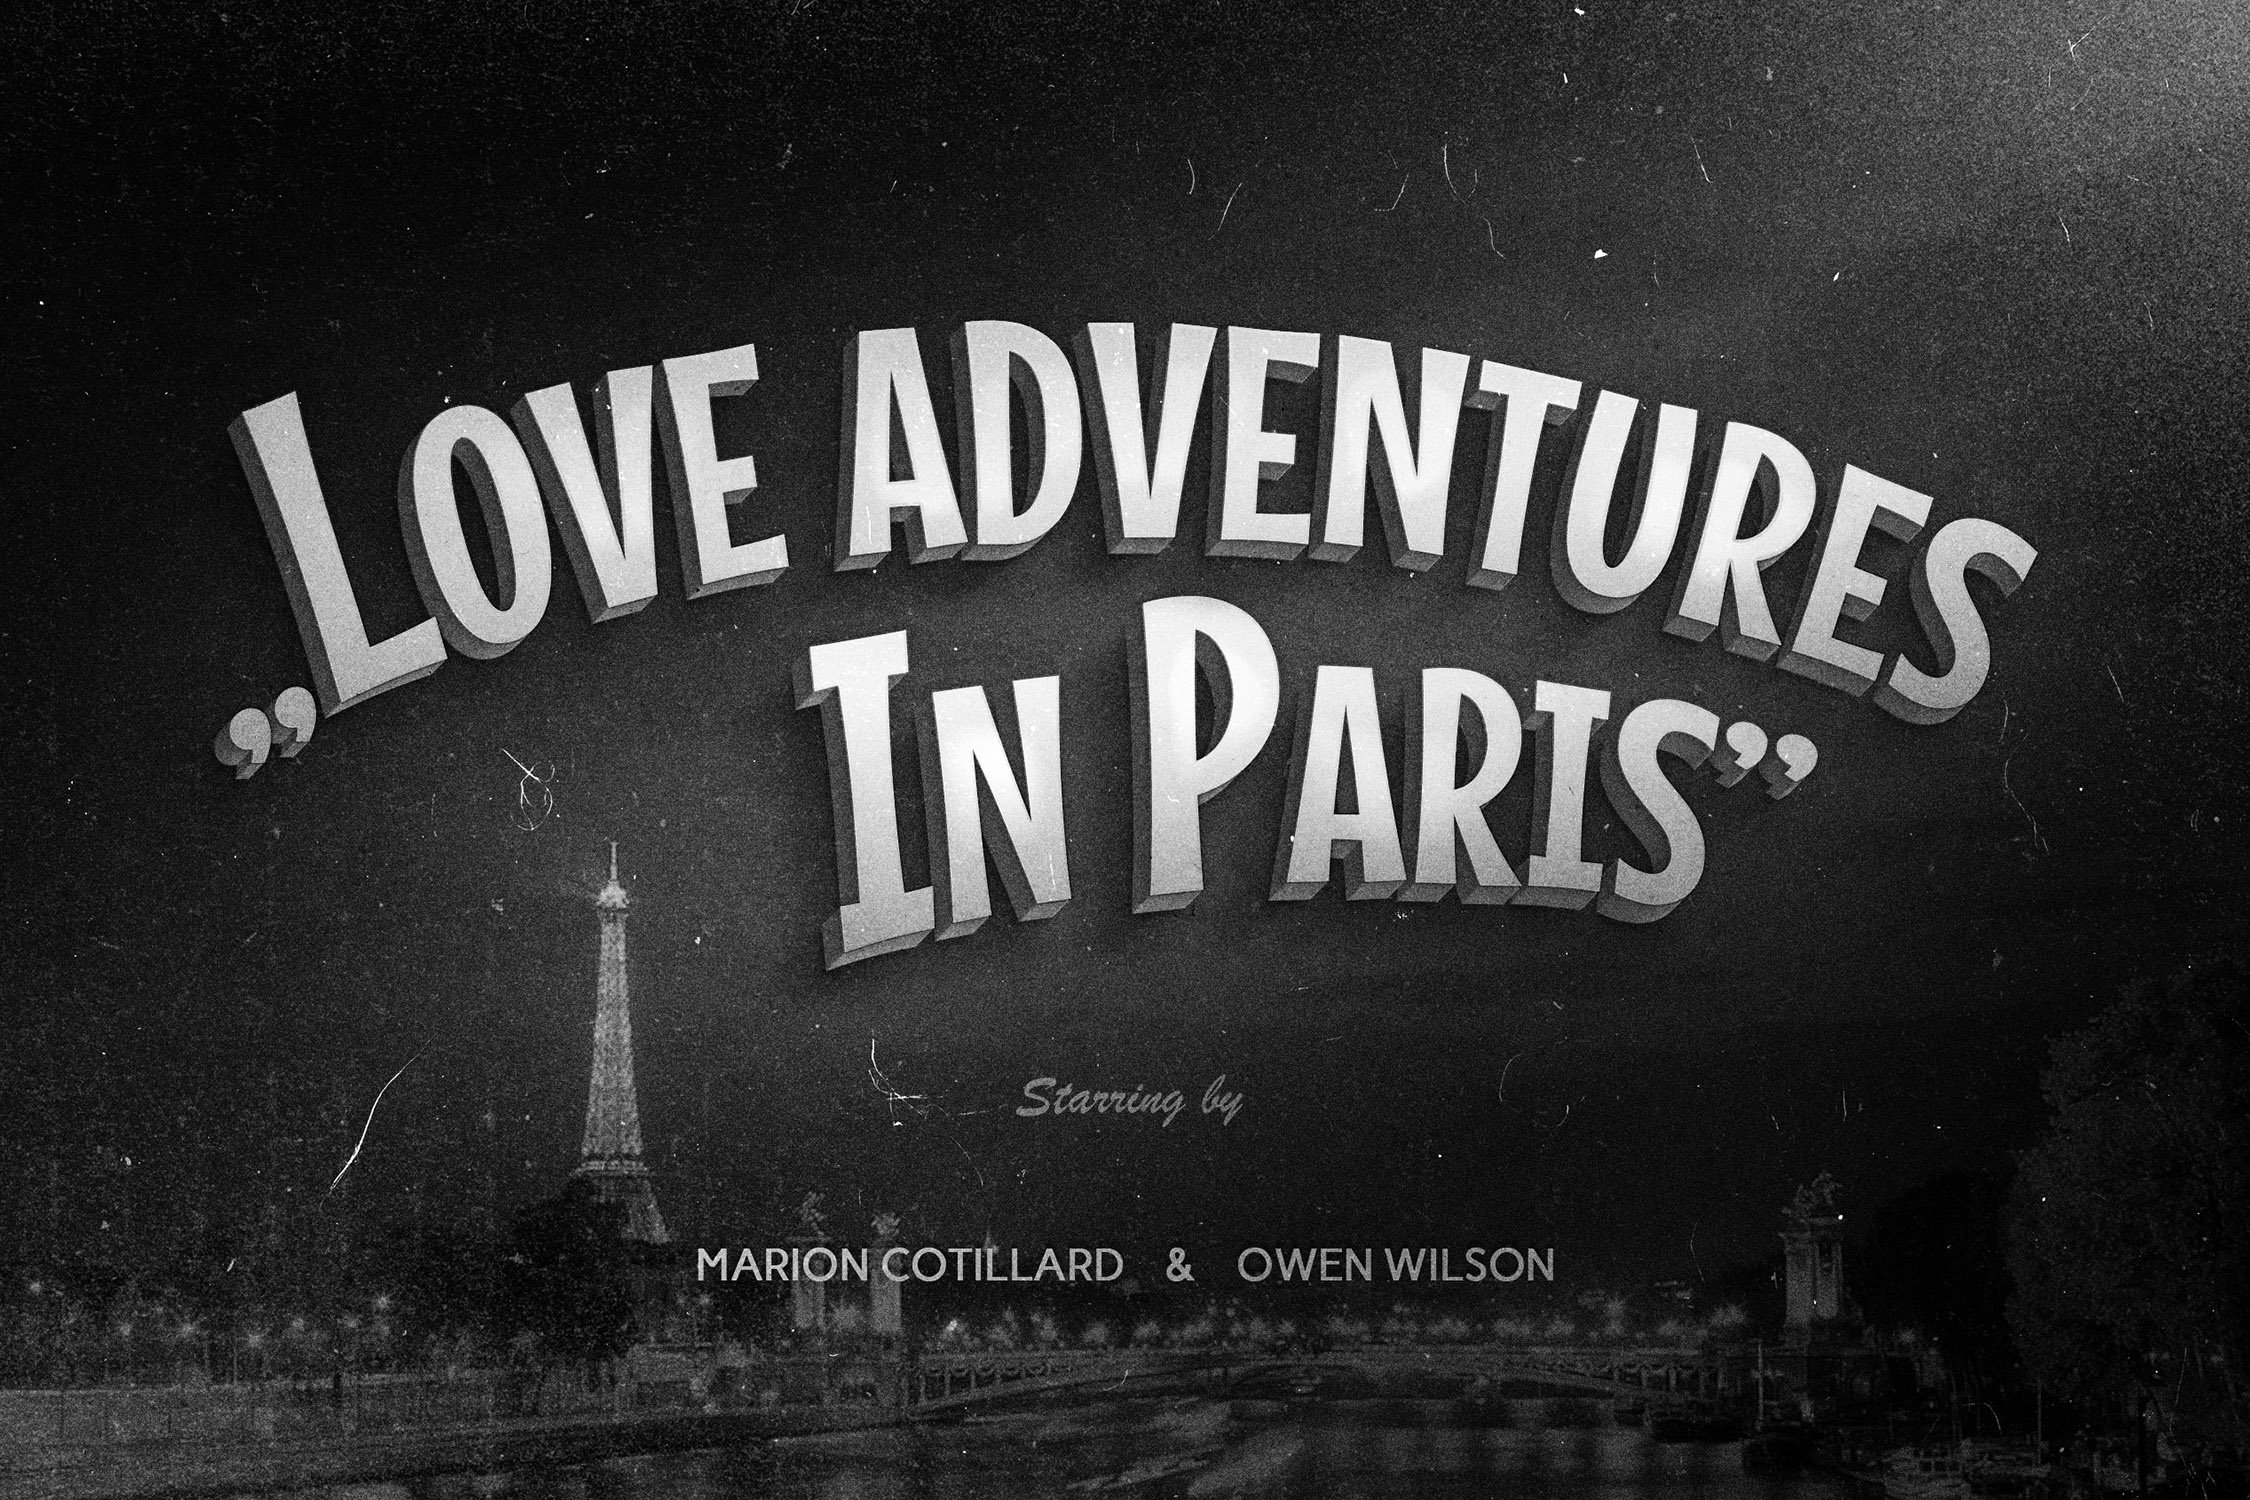 Motion Picture Retro Text Effectcover image.